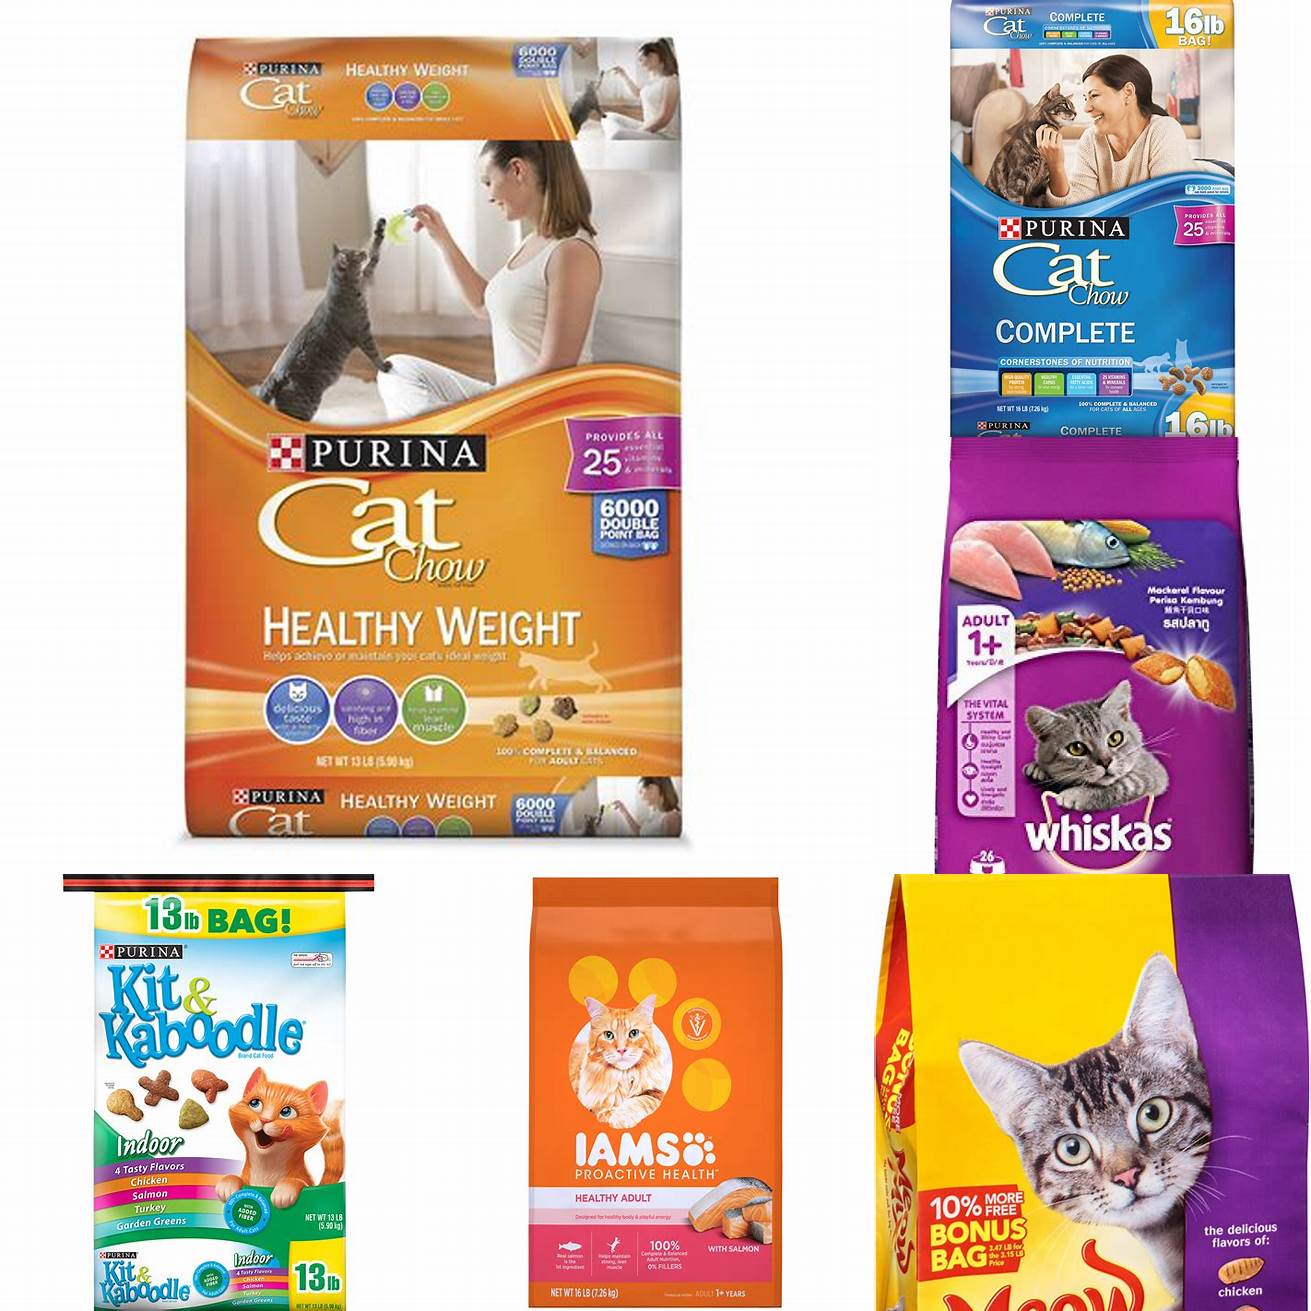 Bags of kitten food and adult cat food